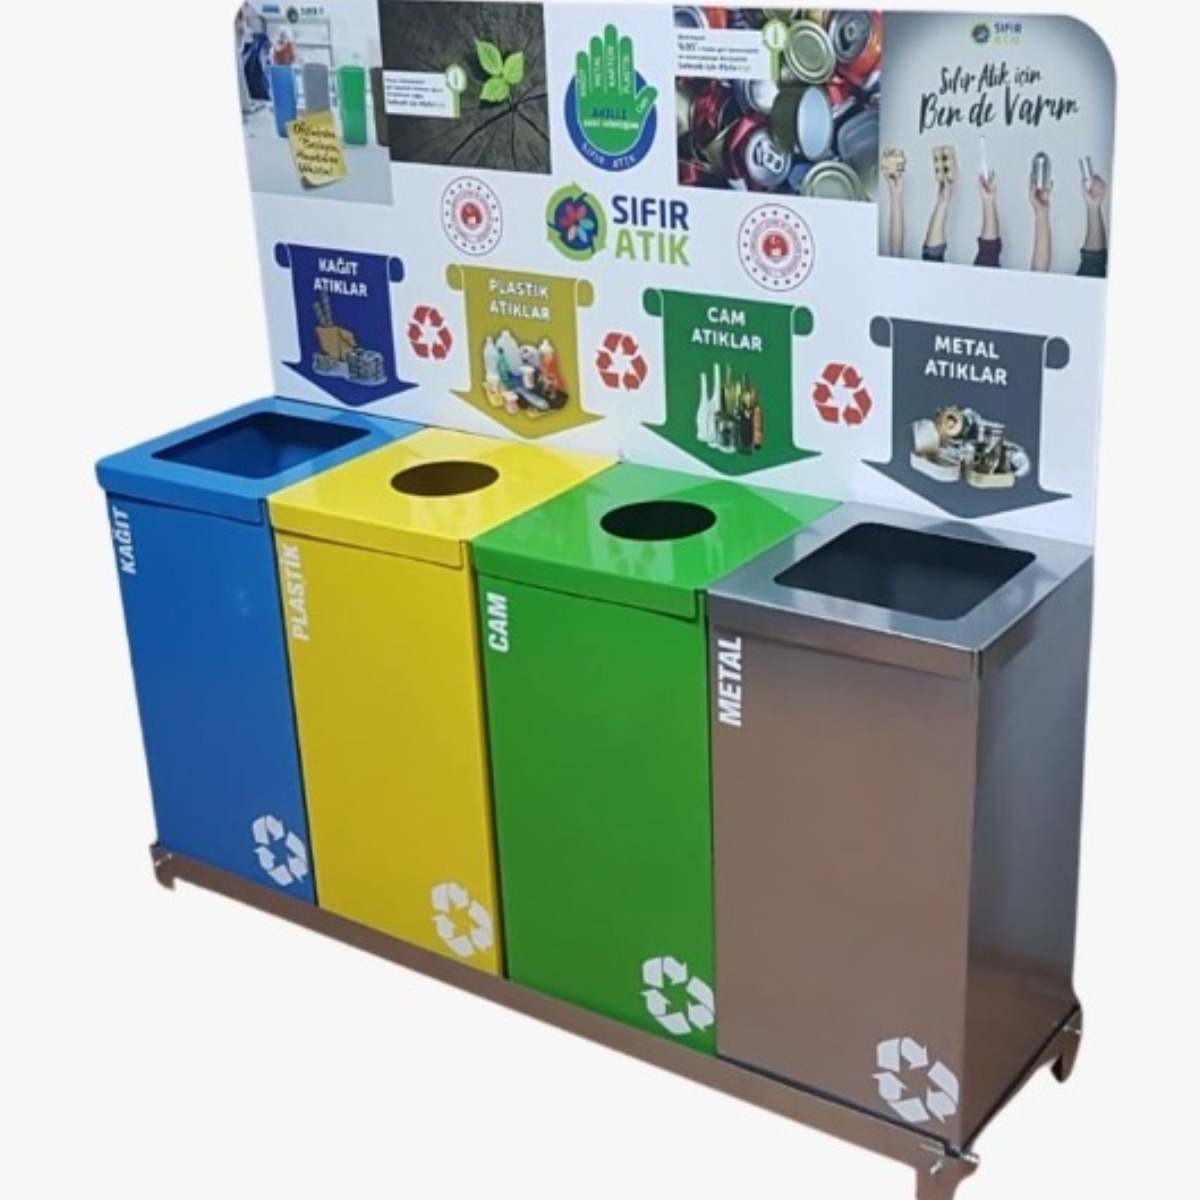 AB-799 4'Part Recycle Bin